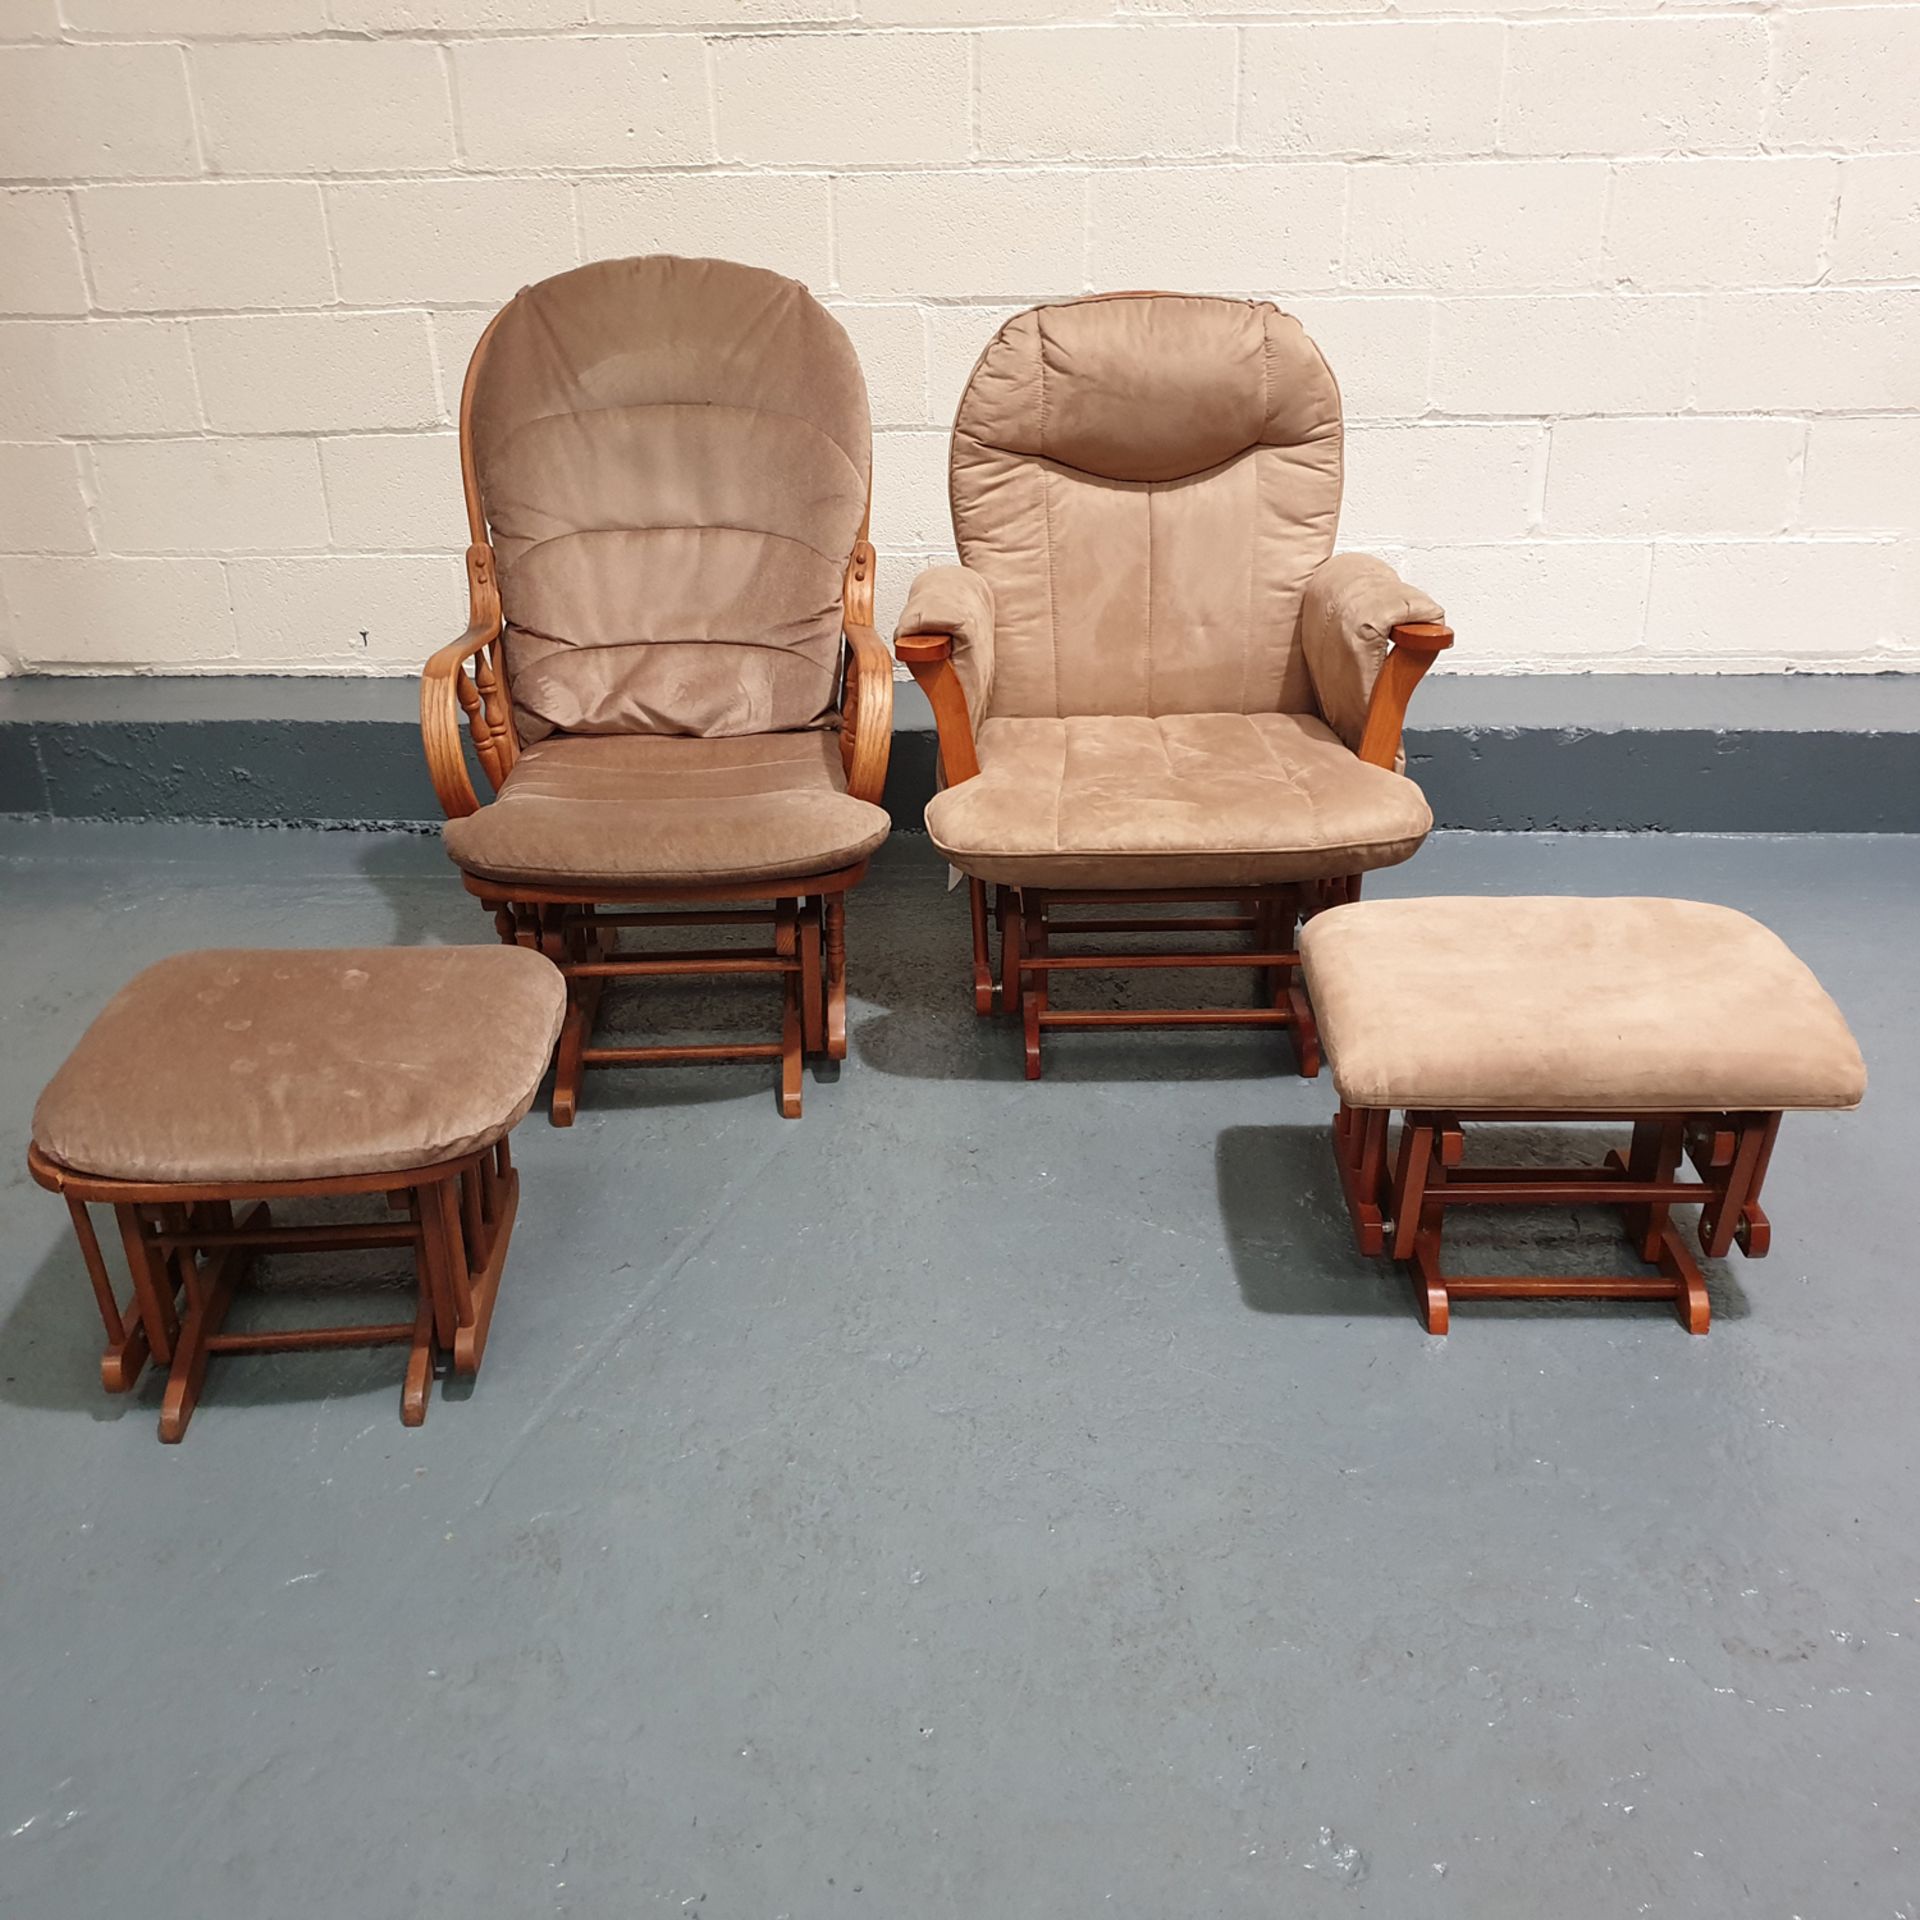 2 x Rocking Chairs with Matching Rocking Foot Rests. - Image 2 of 2